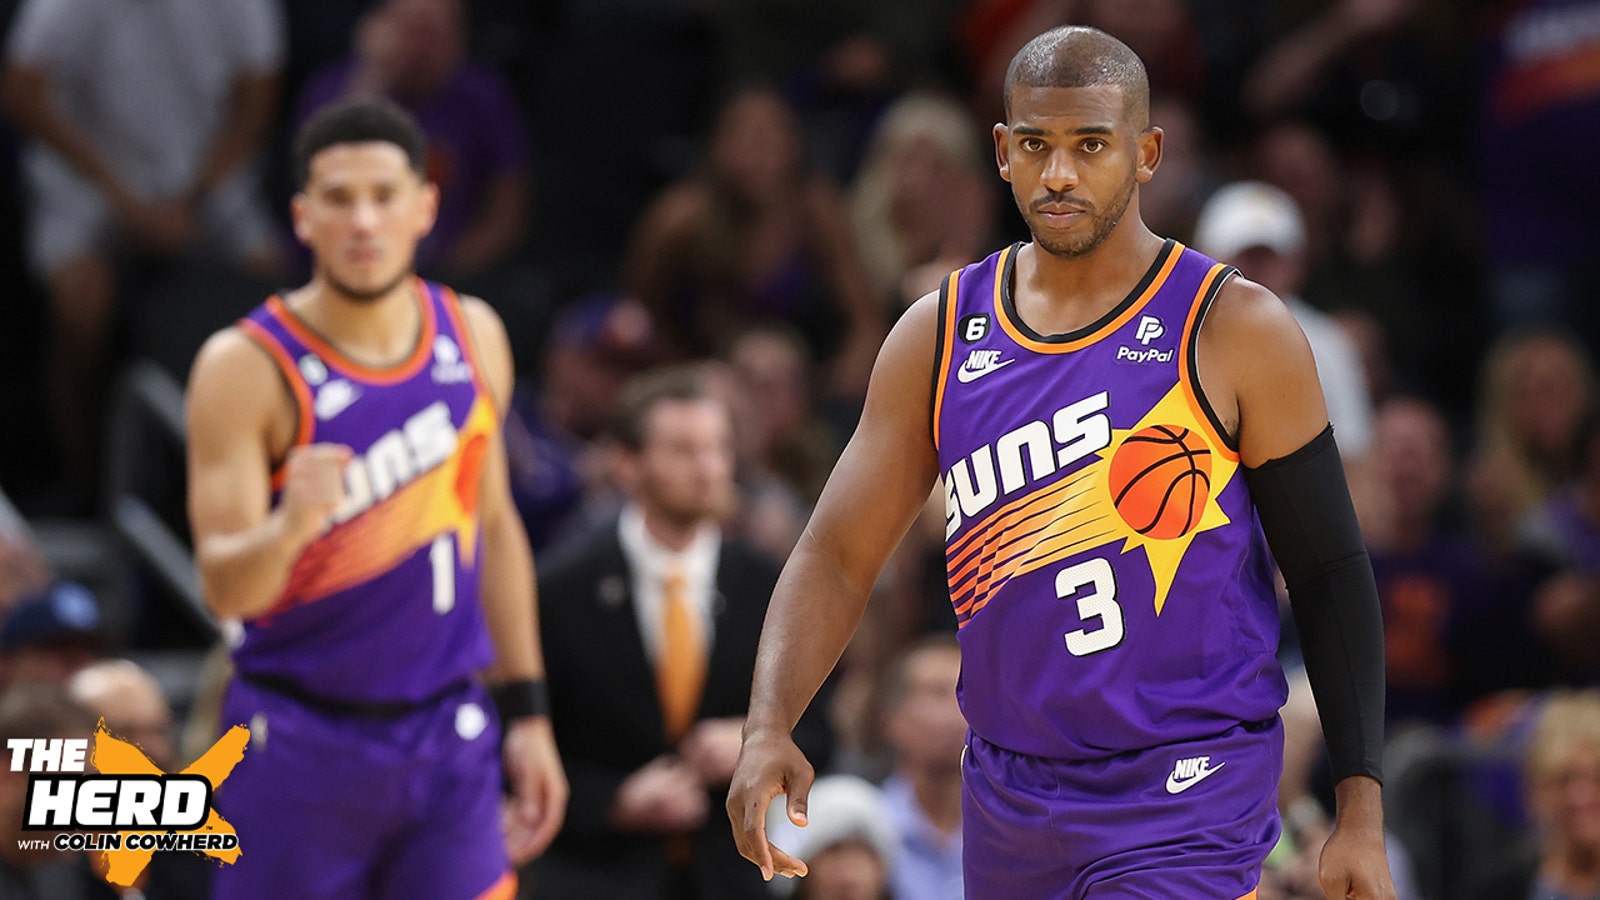 Beryl TV play-6716642c9000c21--Cp3_1686253354929 NBA free agency tracker: Lakers reportedly have 'strong interest' in Chris Paul Sports 